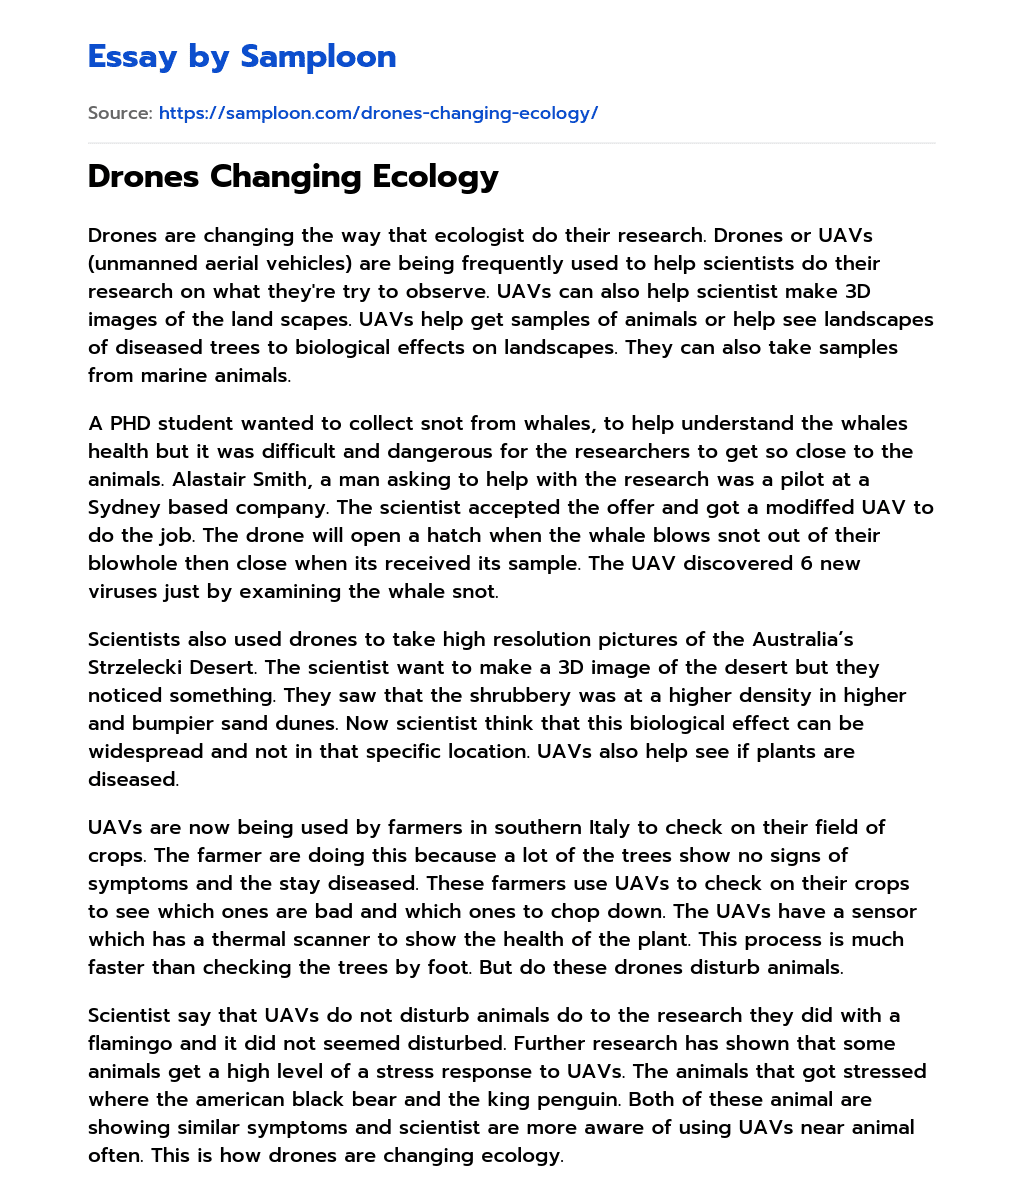 Drones Changing Ecology essay